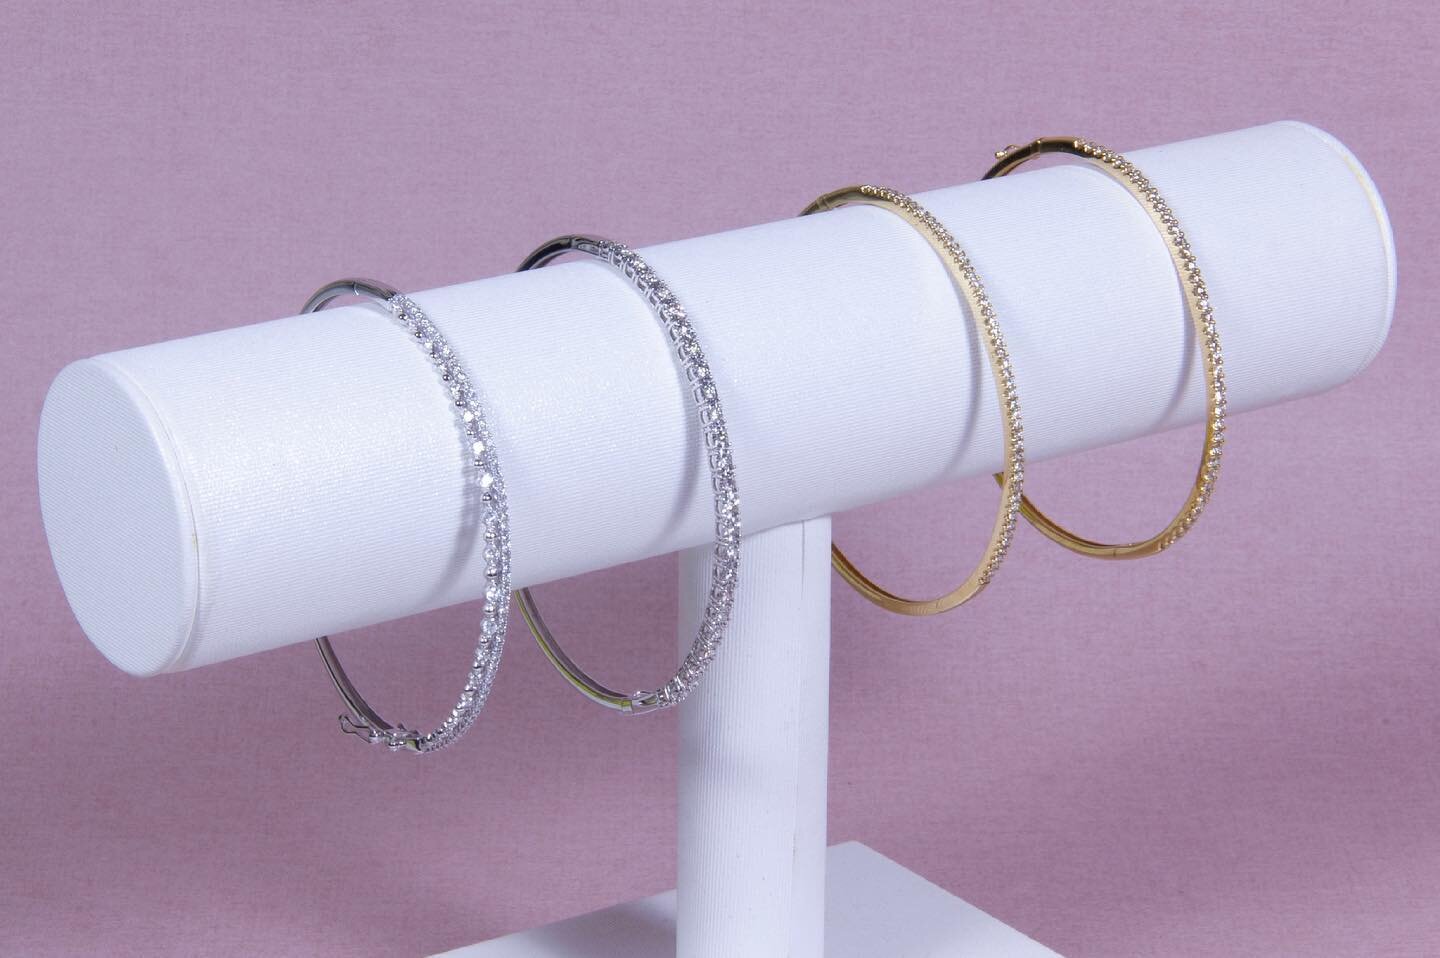 Hinged Bangles

10% off Grand Opening Sale until June 20th🤍

Streamlined and modern designed bangles set with diamonds. The perfect finishing touch for any look.

🔗DM for orders and inquires